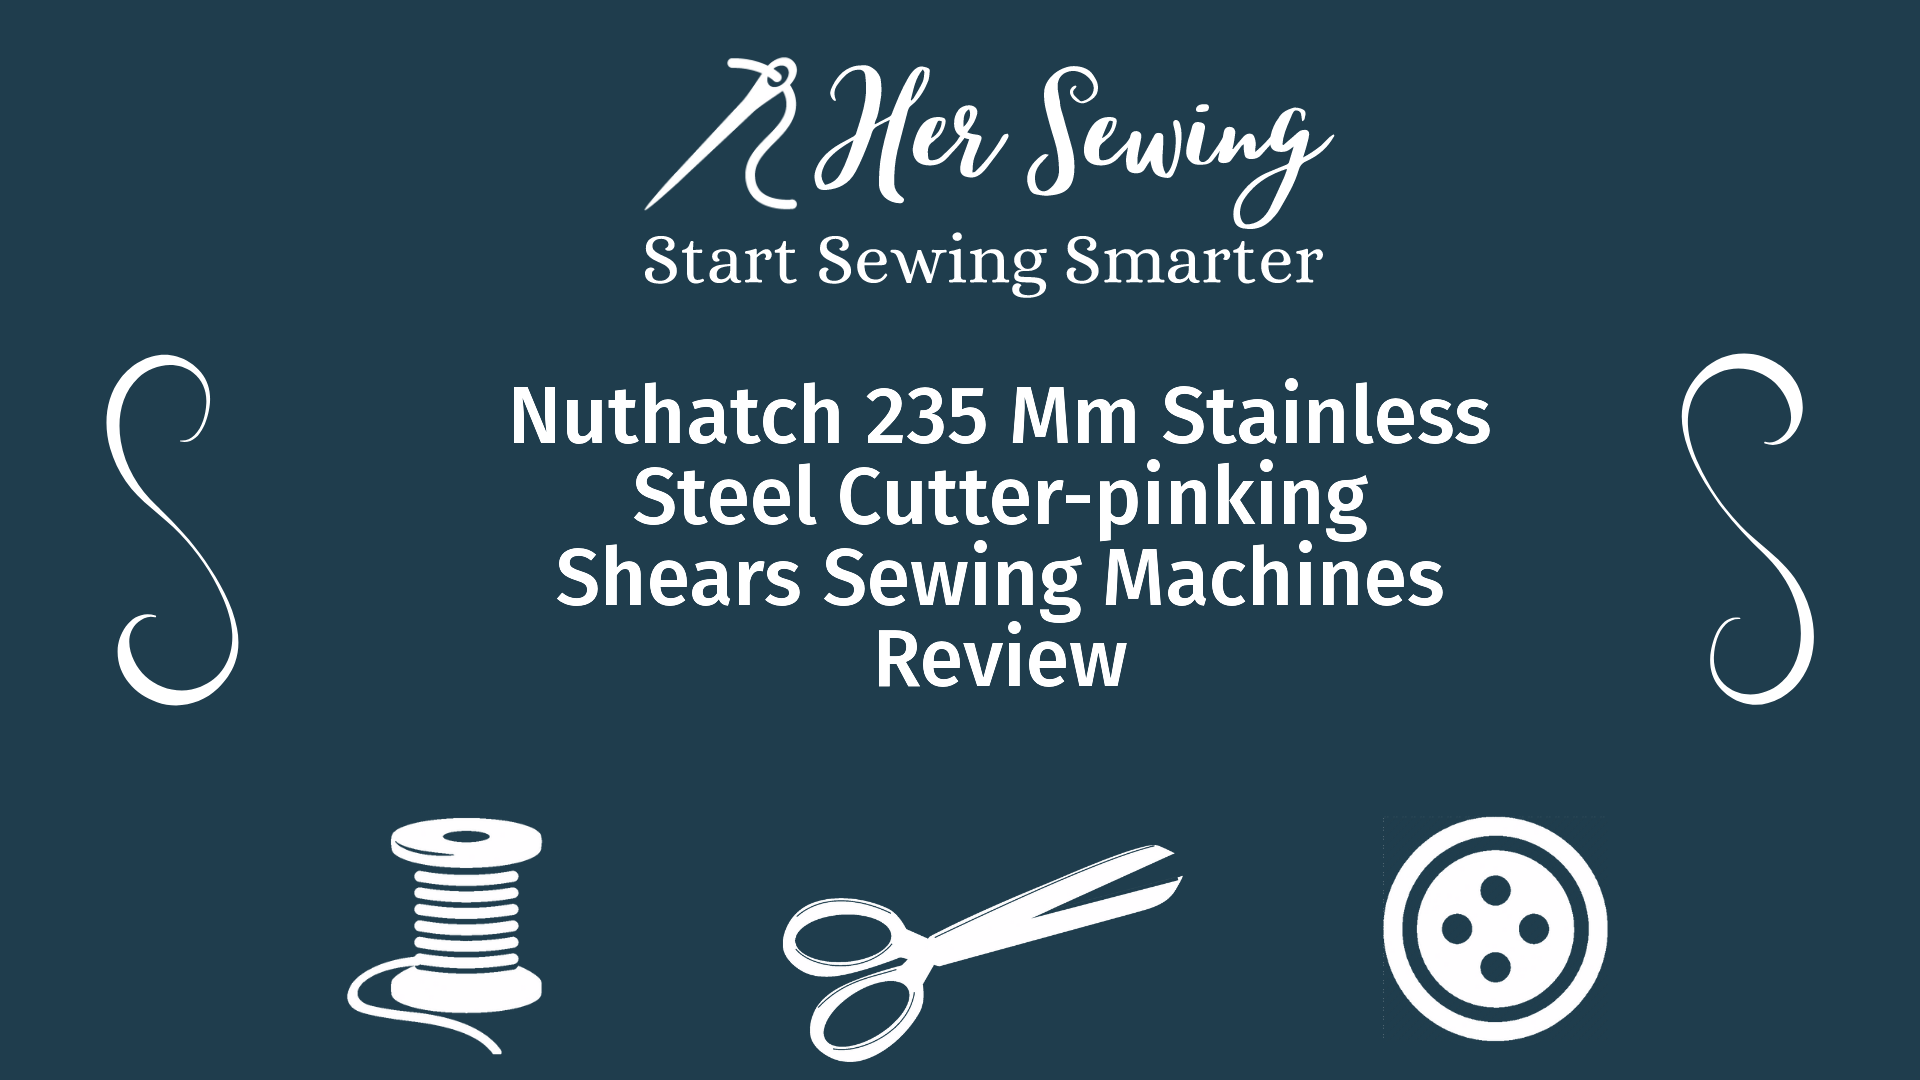 Nuthatch 235 Mm Stainless Steel Cutter-pinking Shears Sewing Machines Review